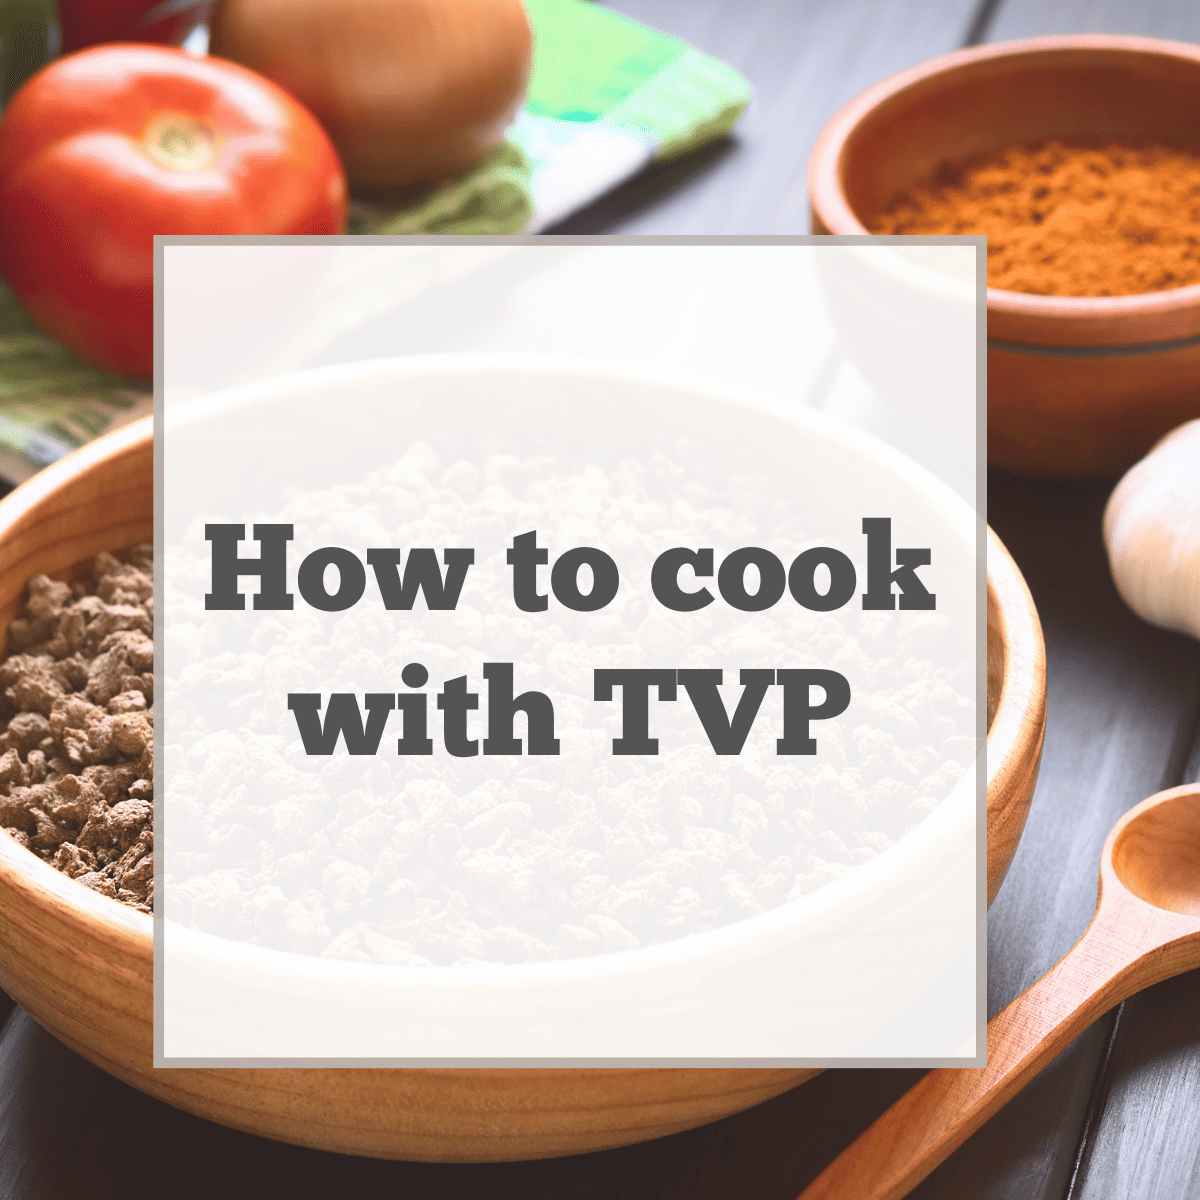 How to Use TVP or Textured Vegetable Protein